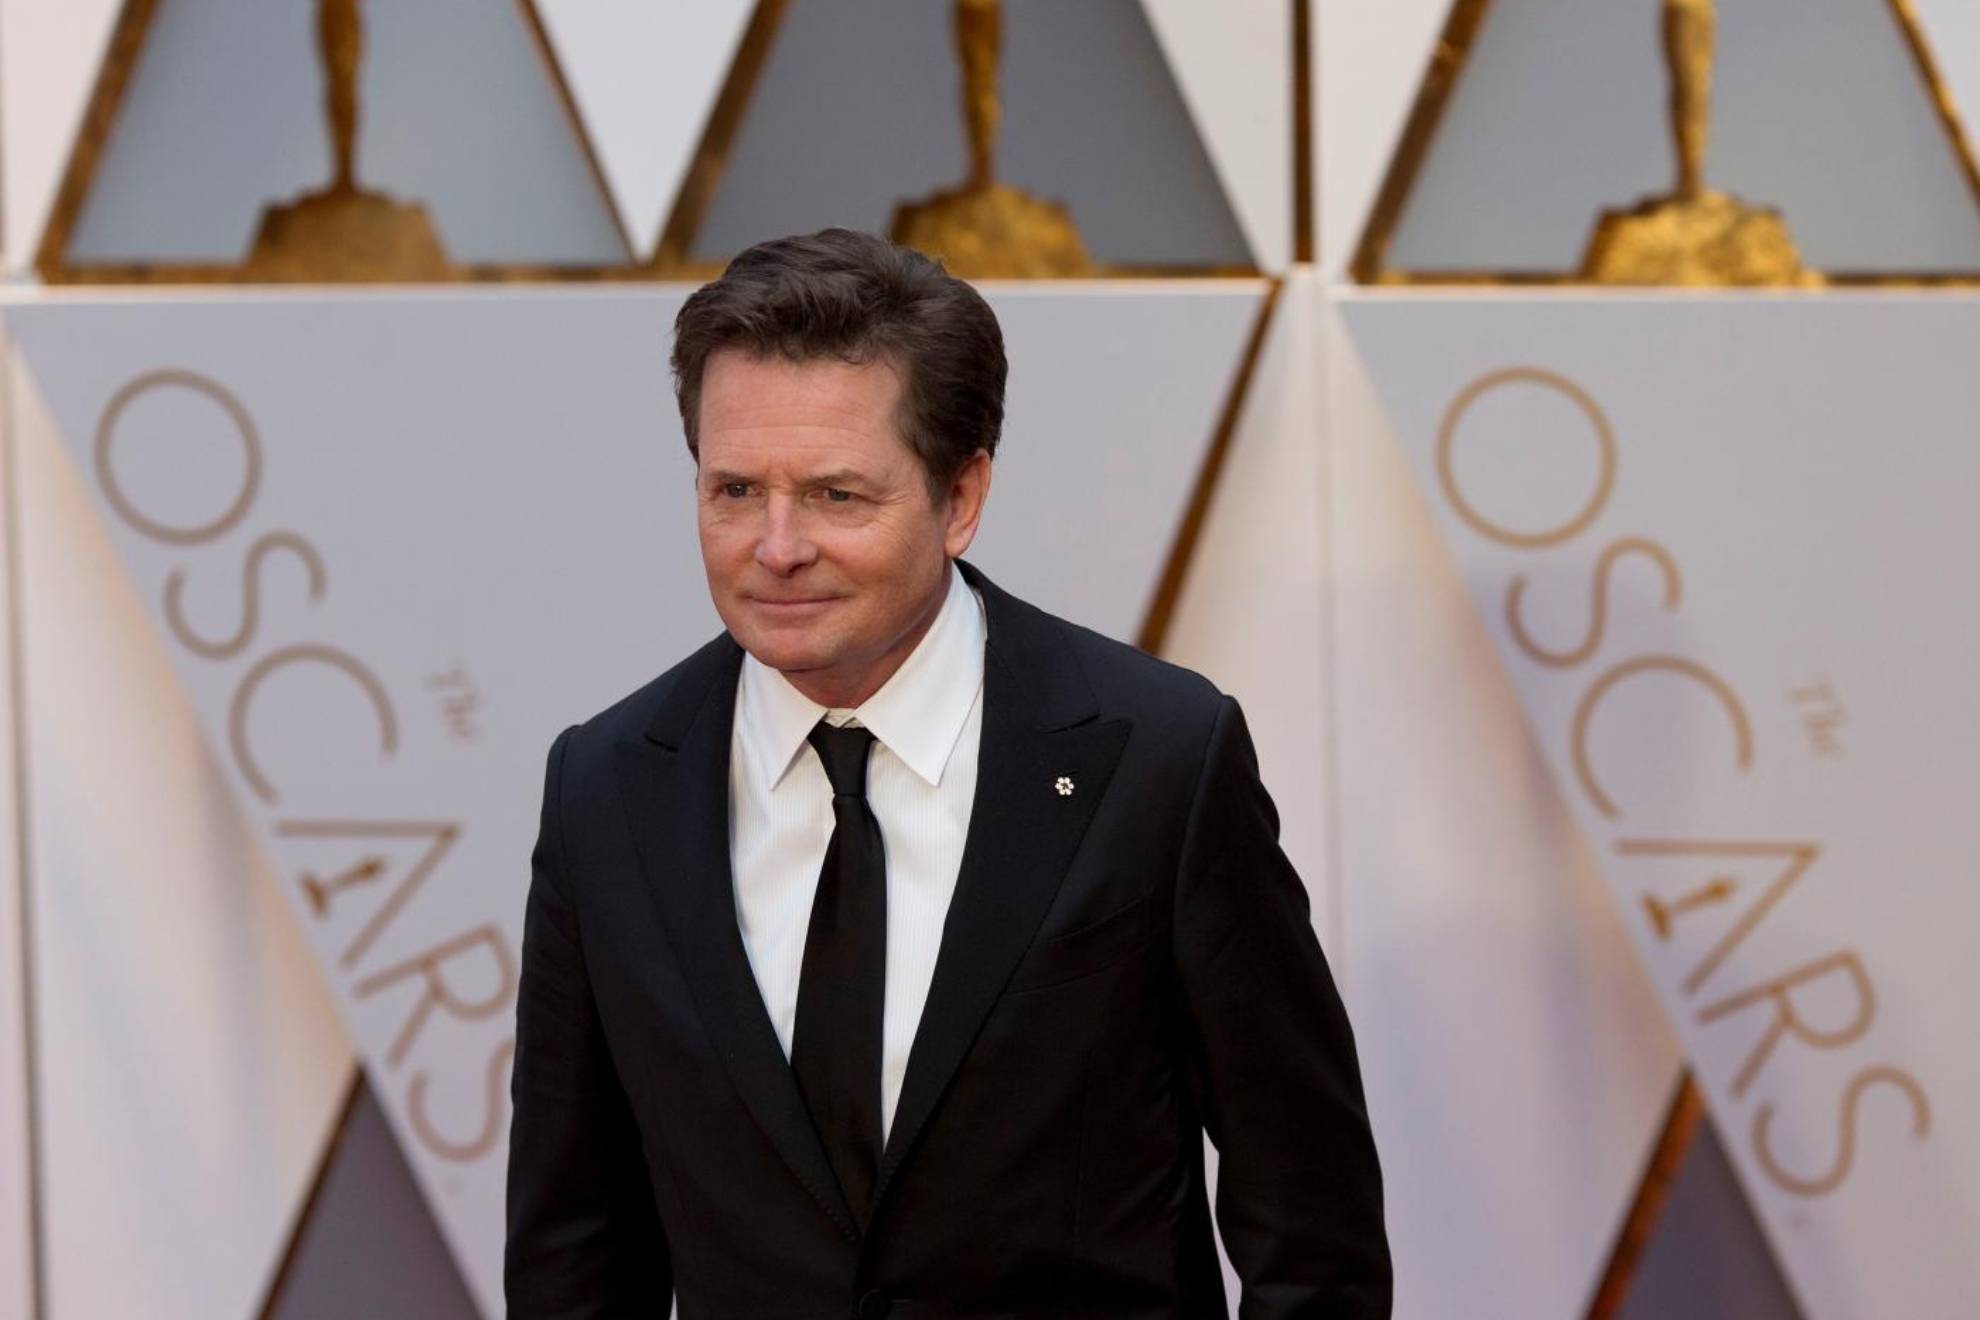 Michael J. Fox receives honorary Oscar for his fight against Parkinson's disease